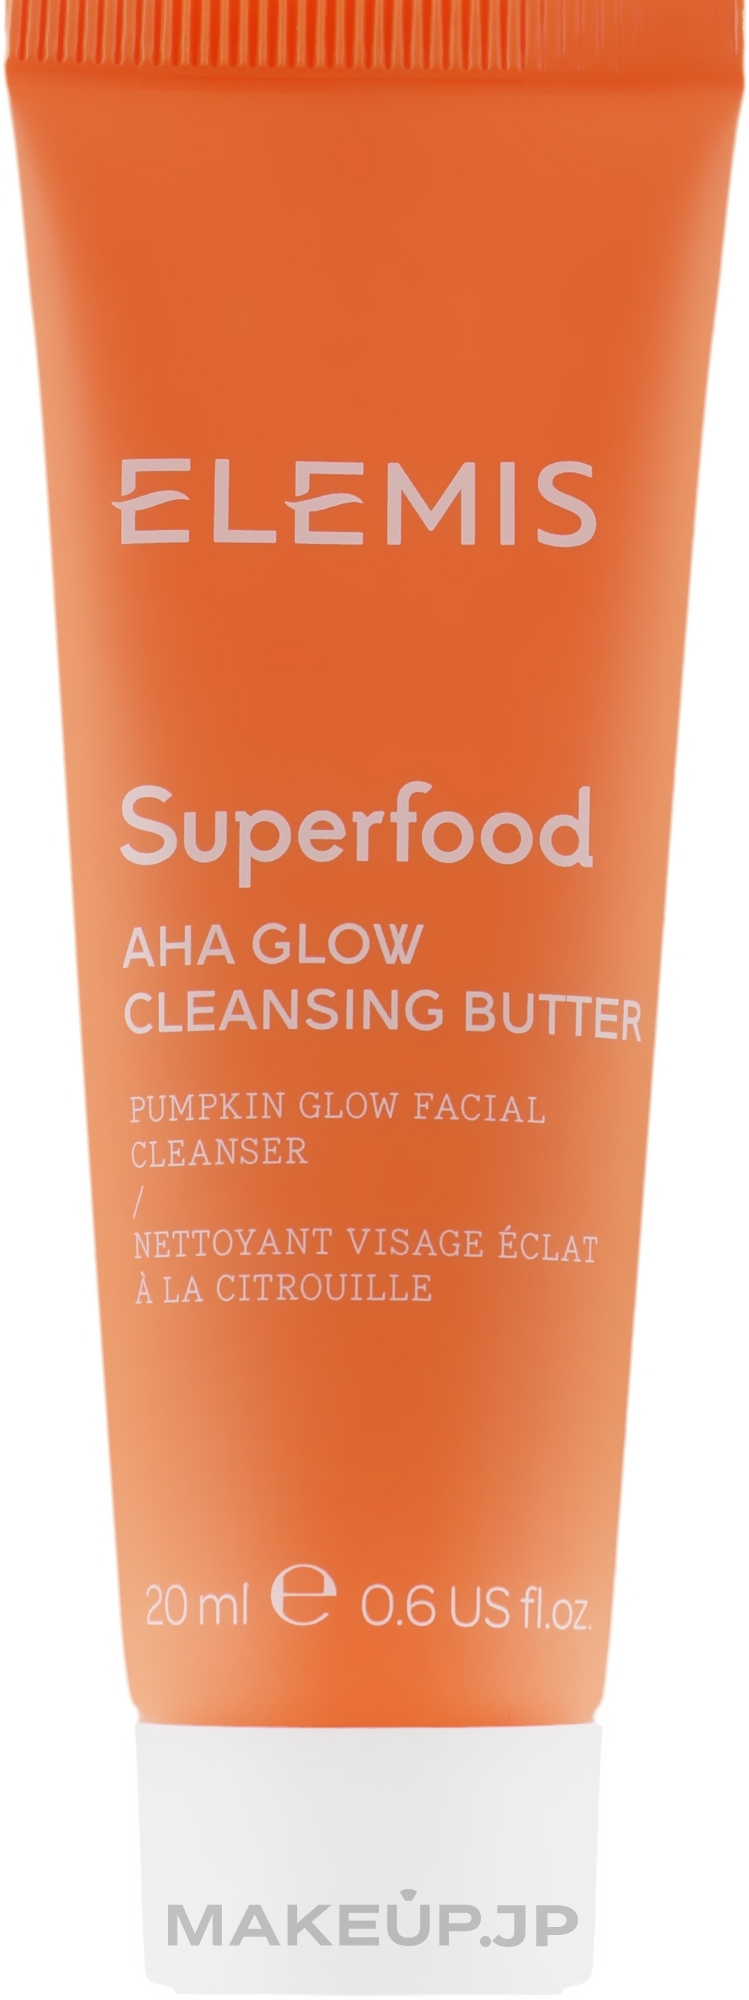 Glow Cleanser Butter - Elemis Superfood AHA Glow Cleansing Butter (mini size) — photo 20 ml